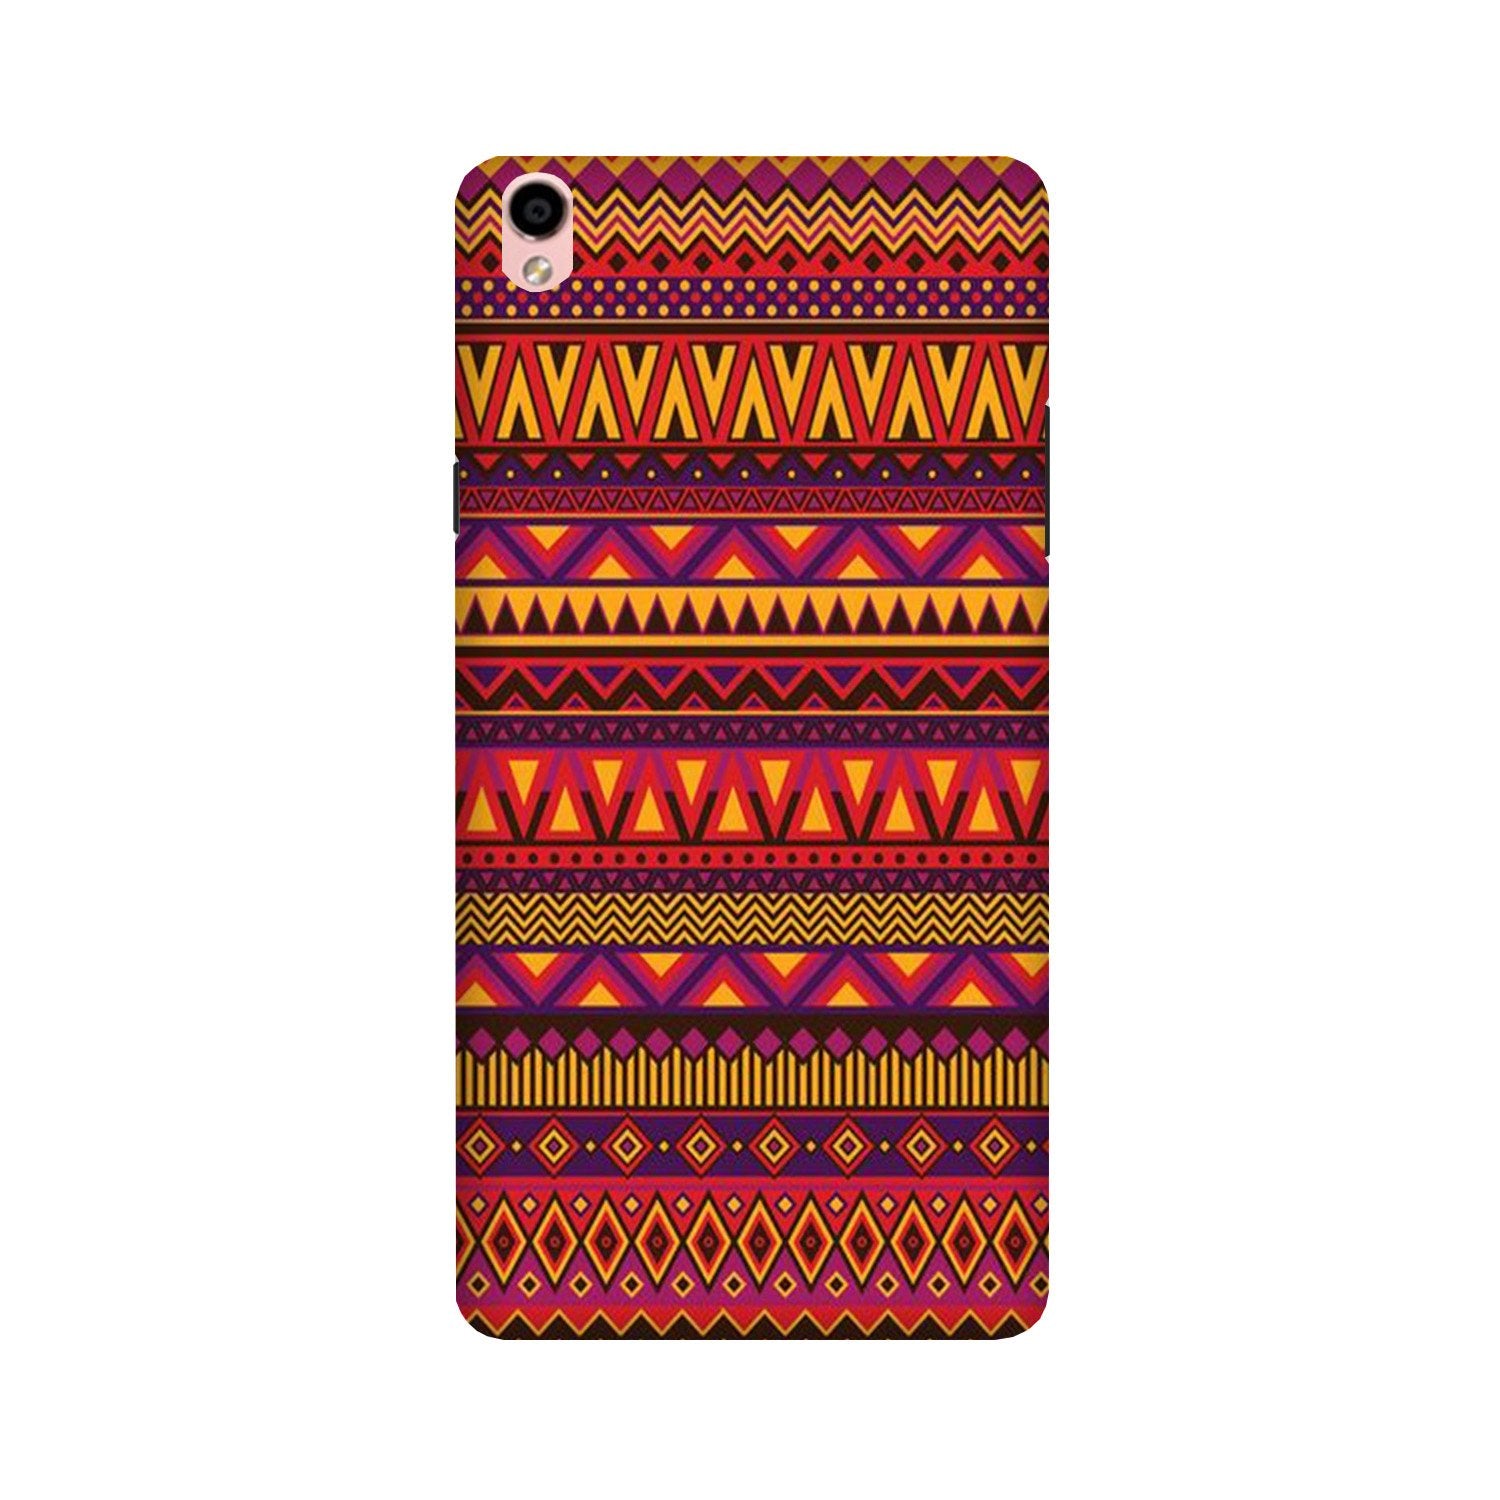 Zigzag line pattern2 Case for Oppo F1 Plus